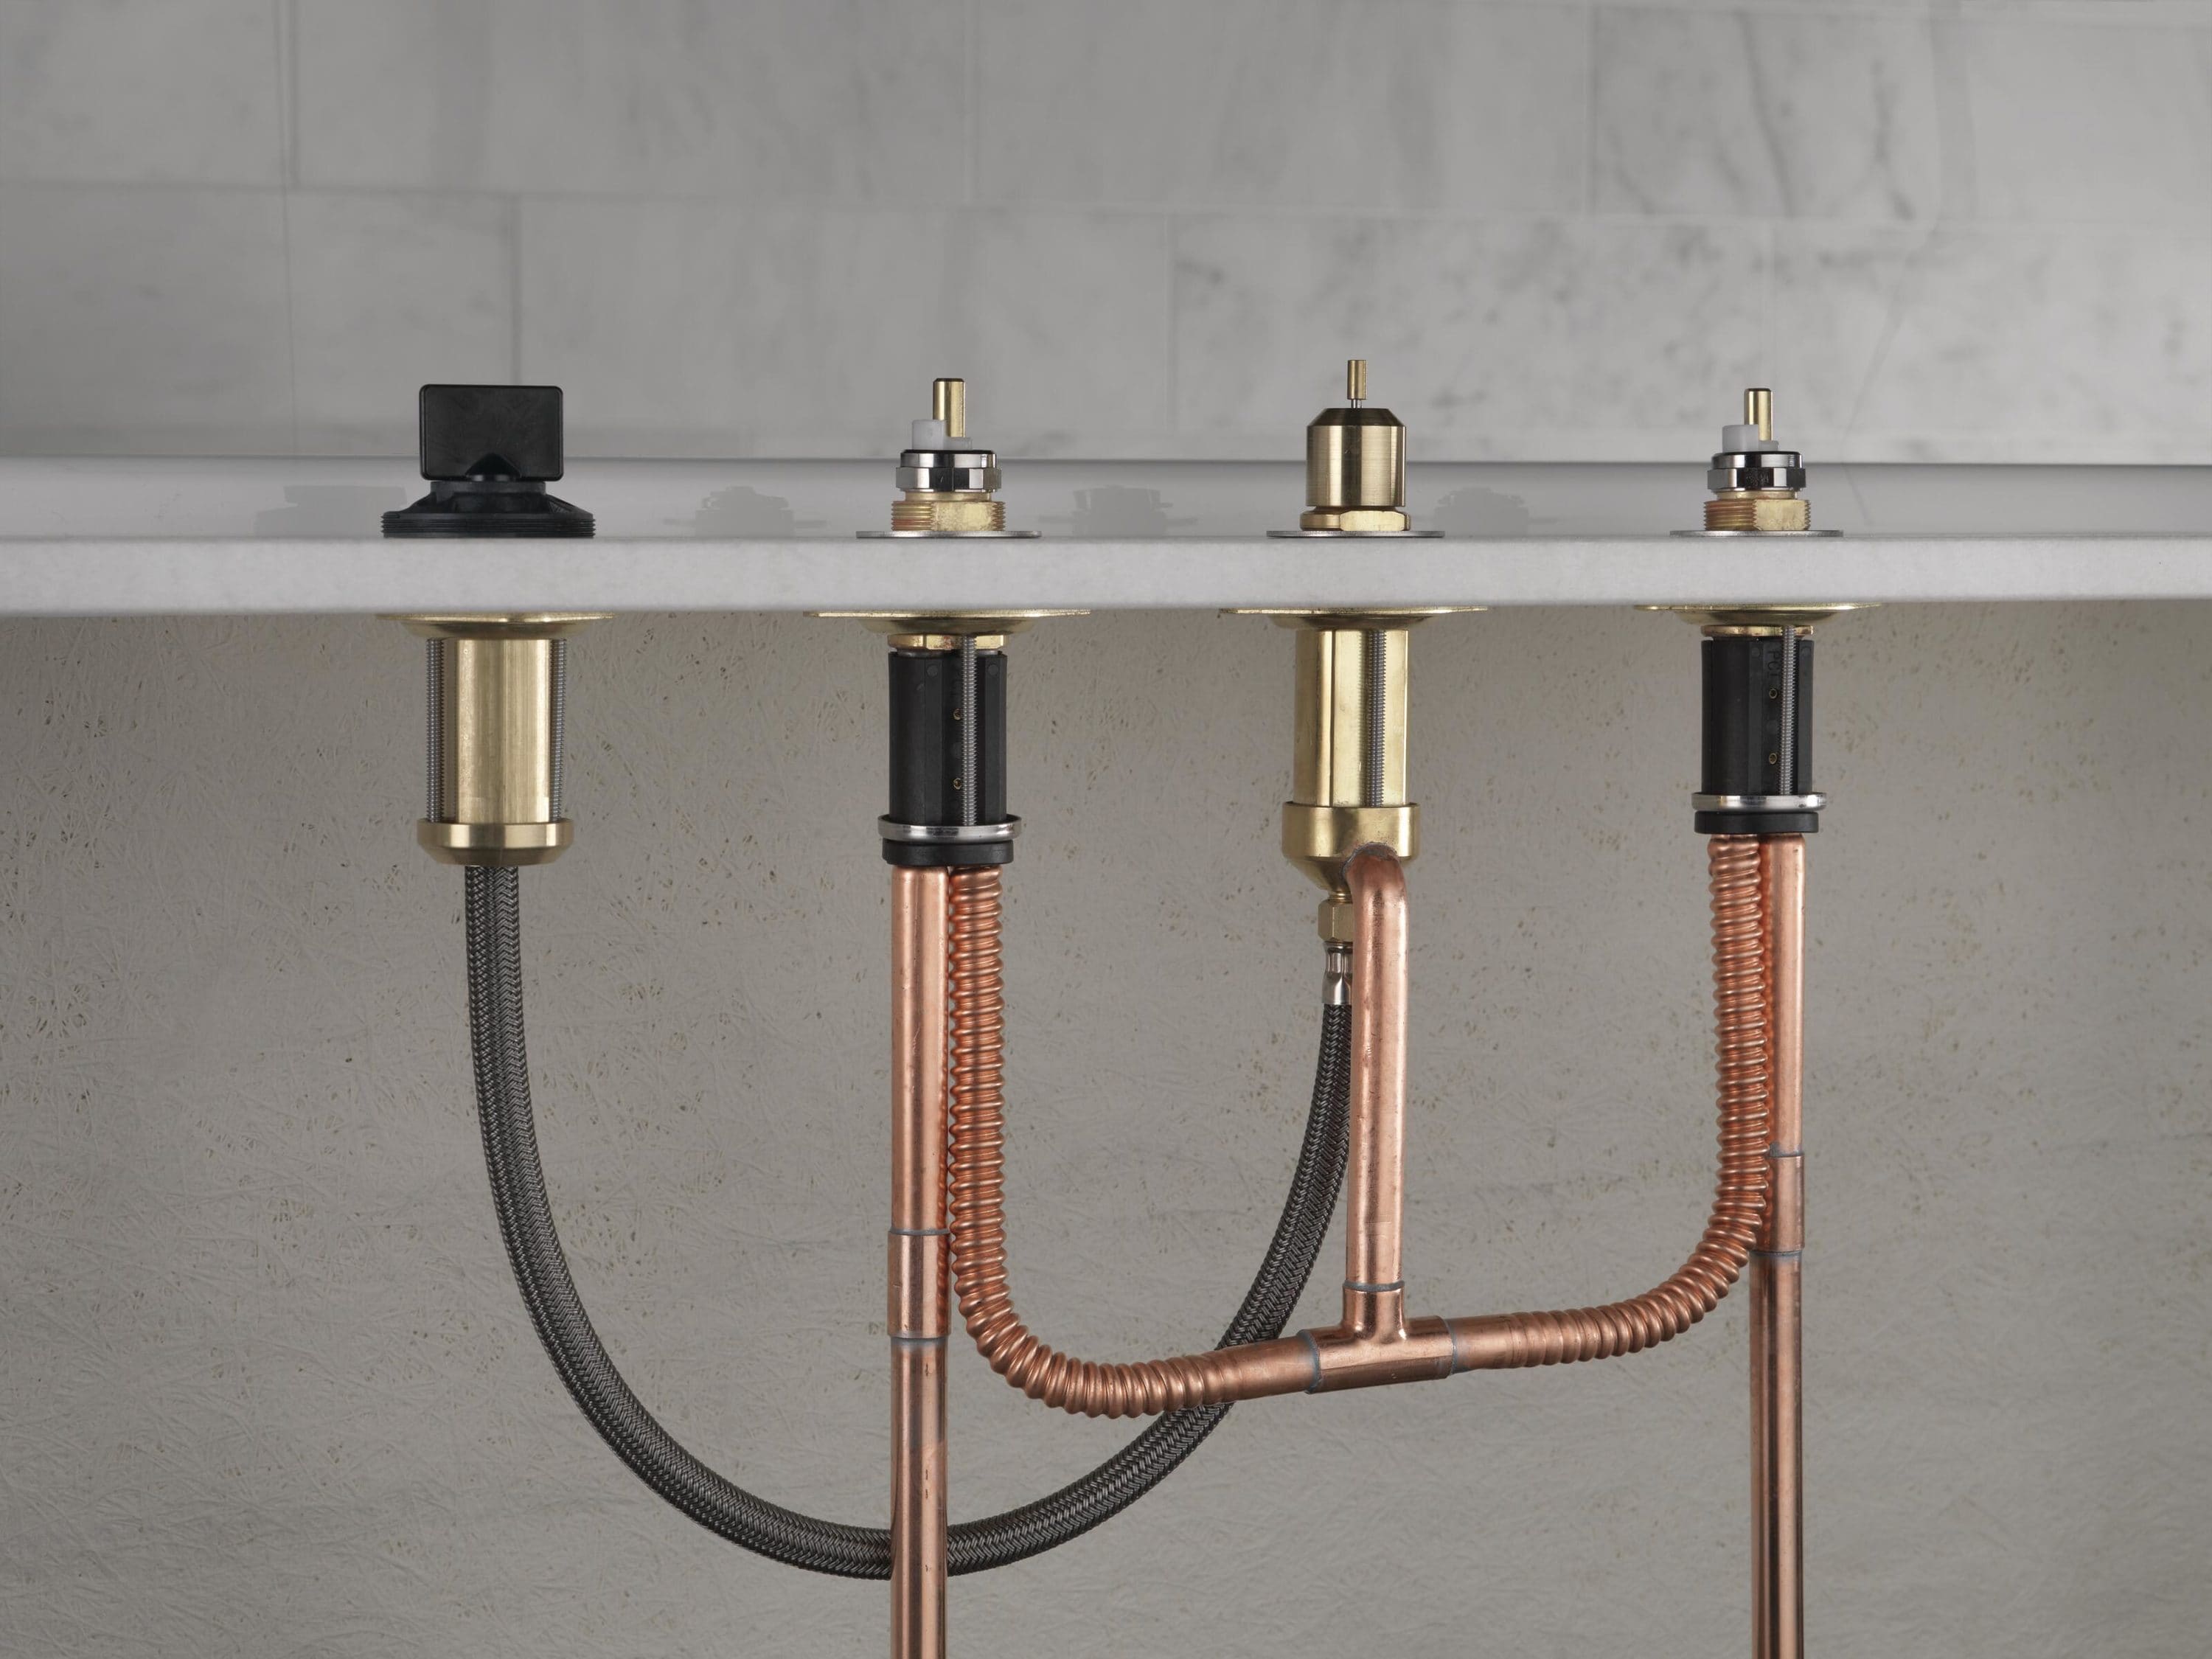 Delta Flexible Roman Tub with Handshower Rough in the Tub  Shower Valves  department at